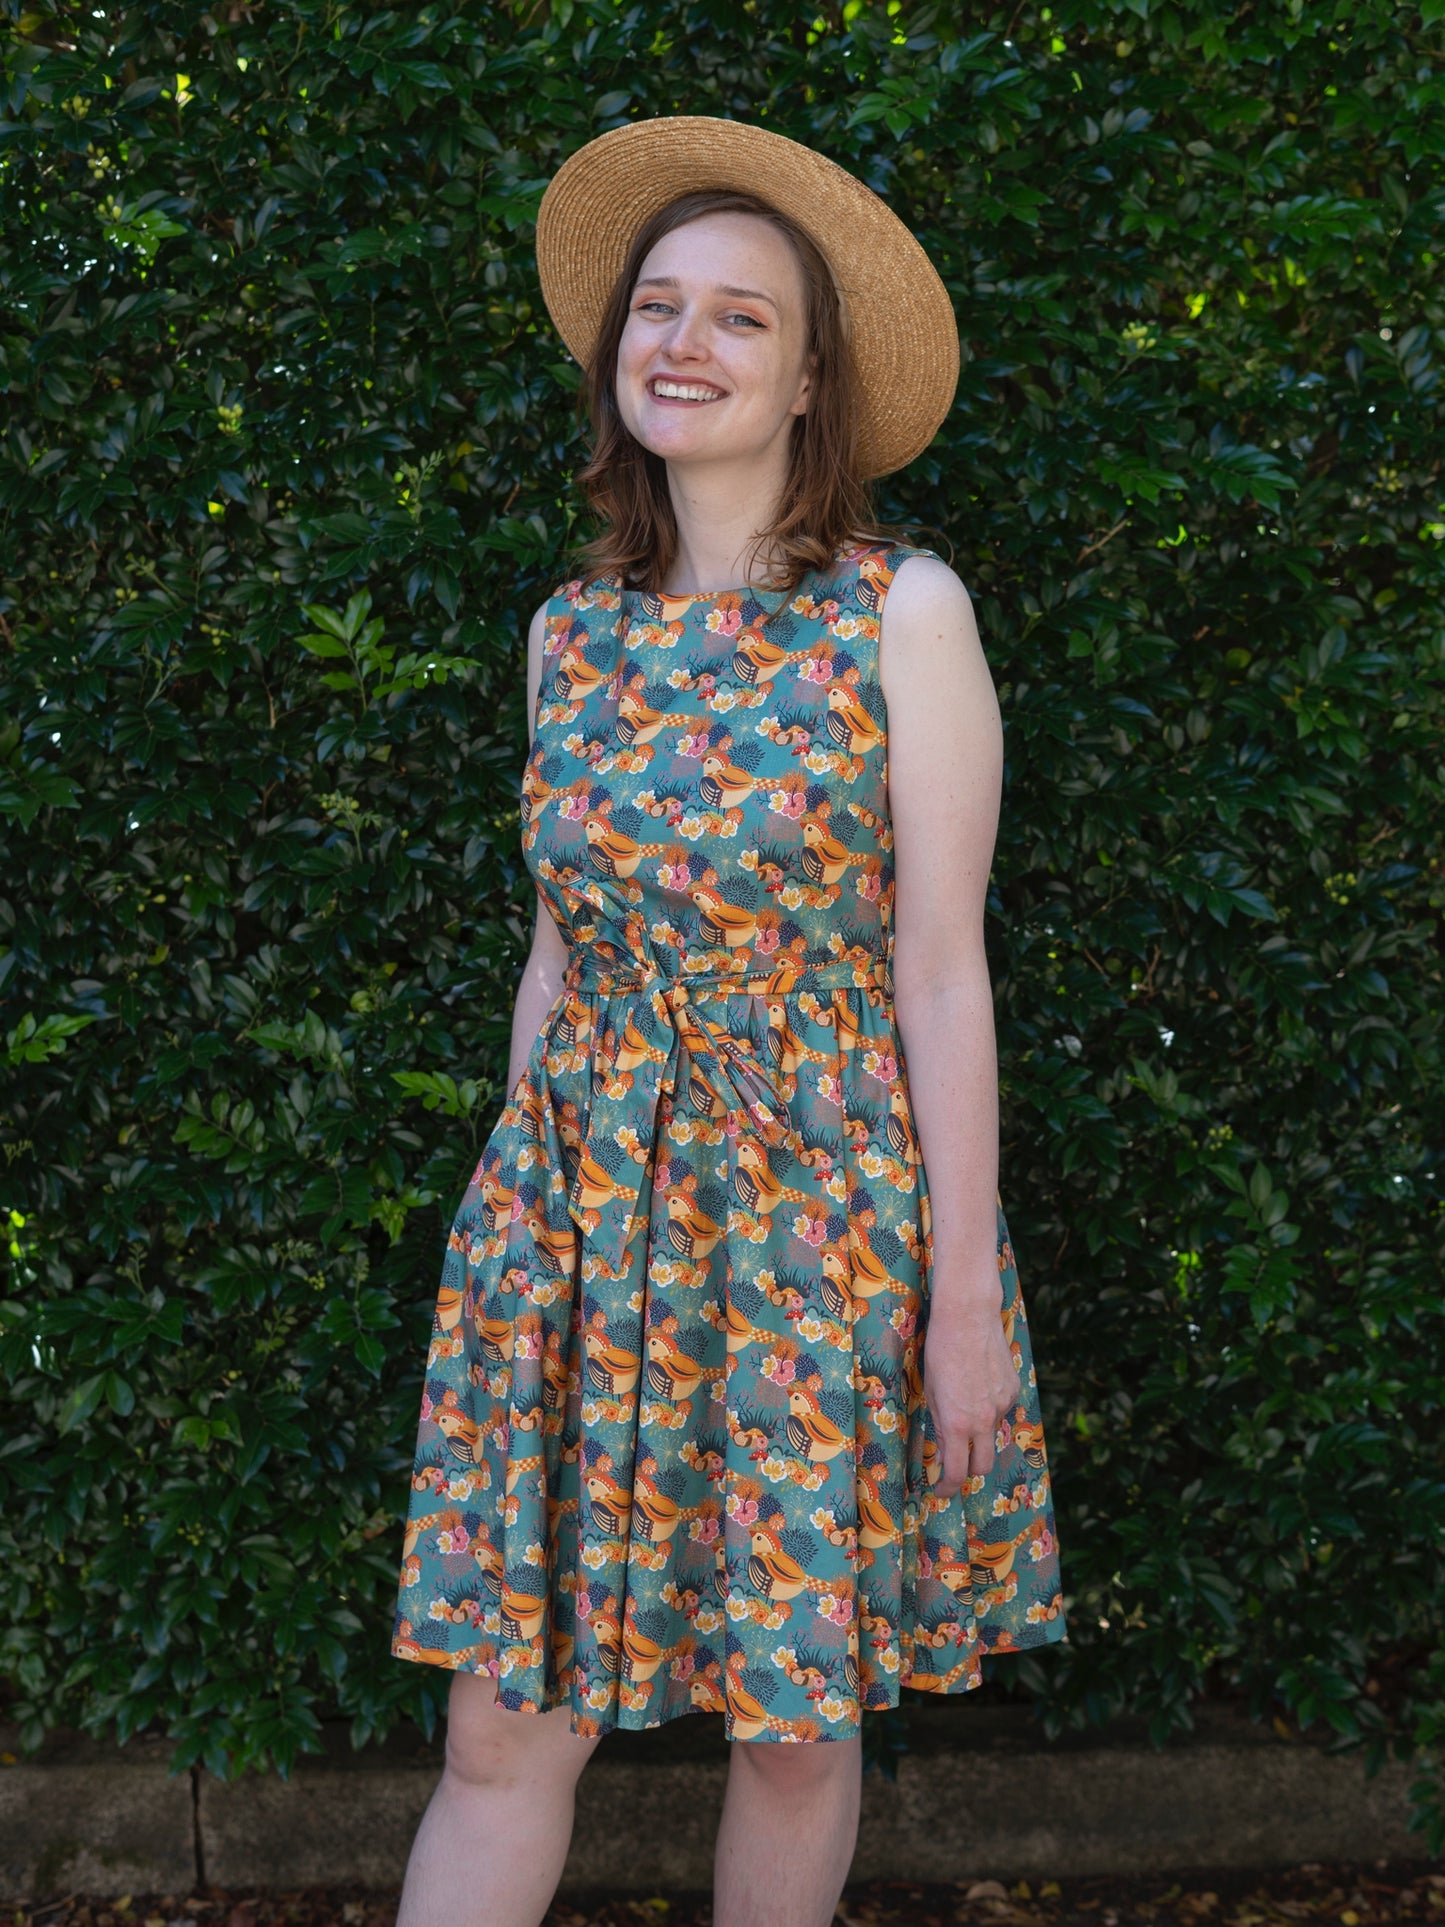 Spring Blooming Dress - Golden Sparrow (size 16)